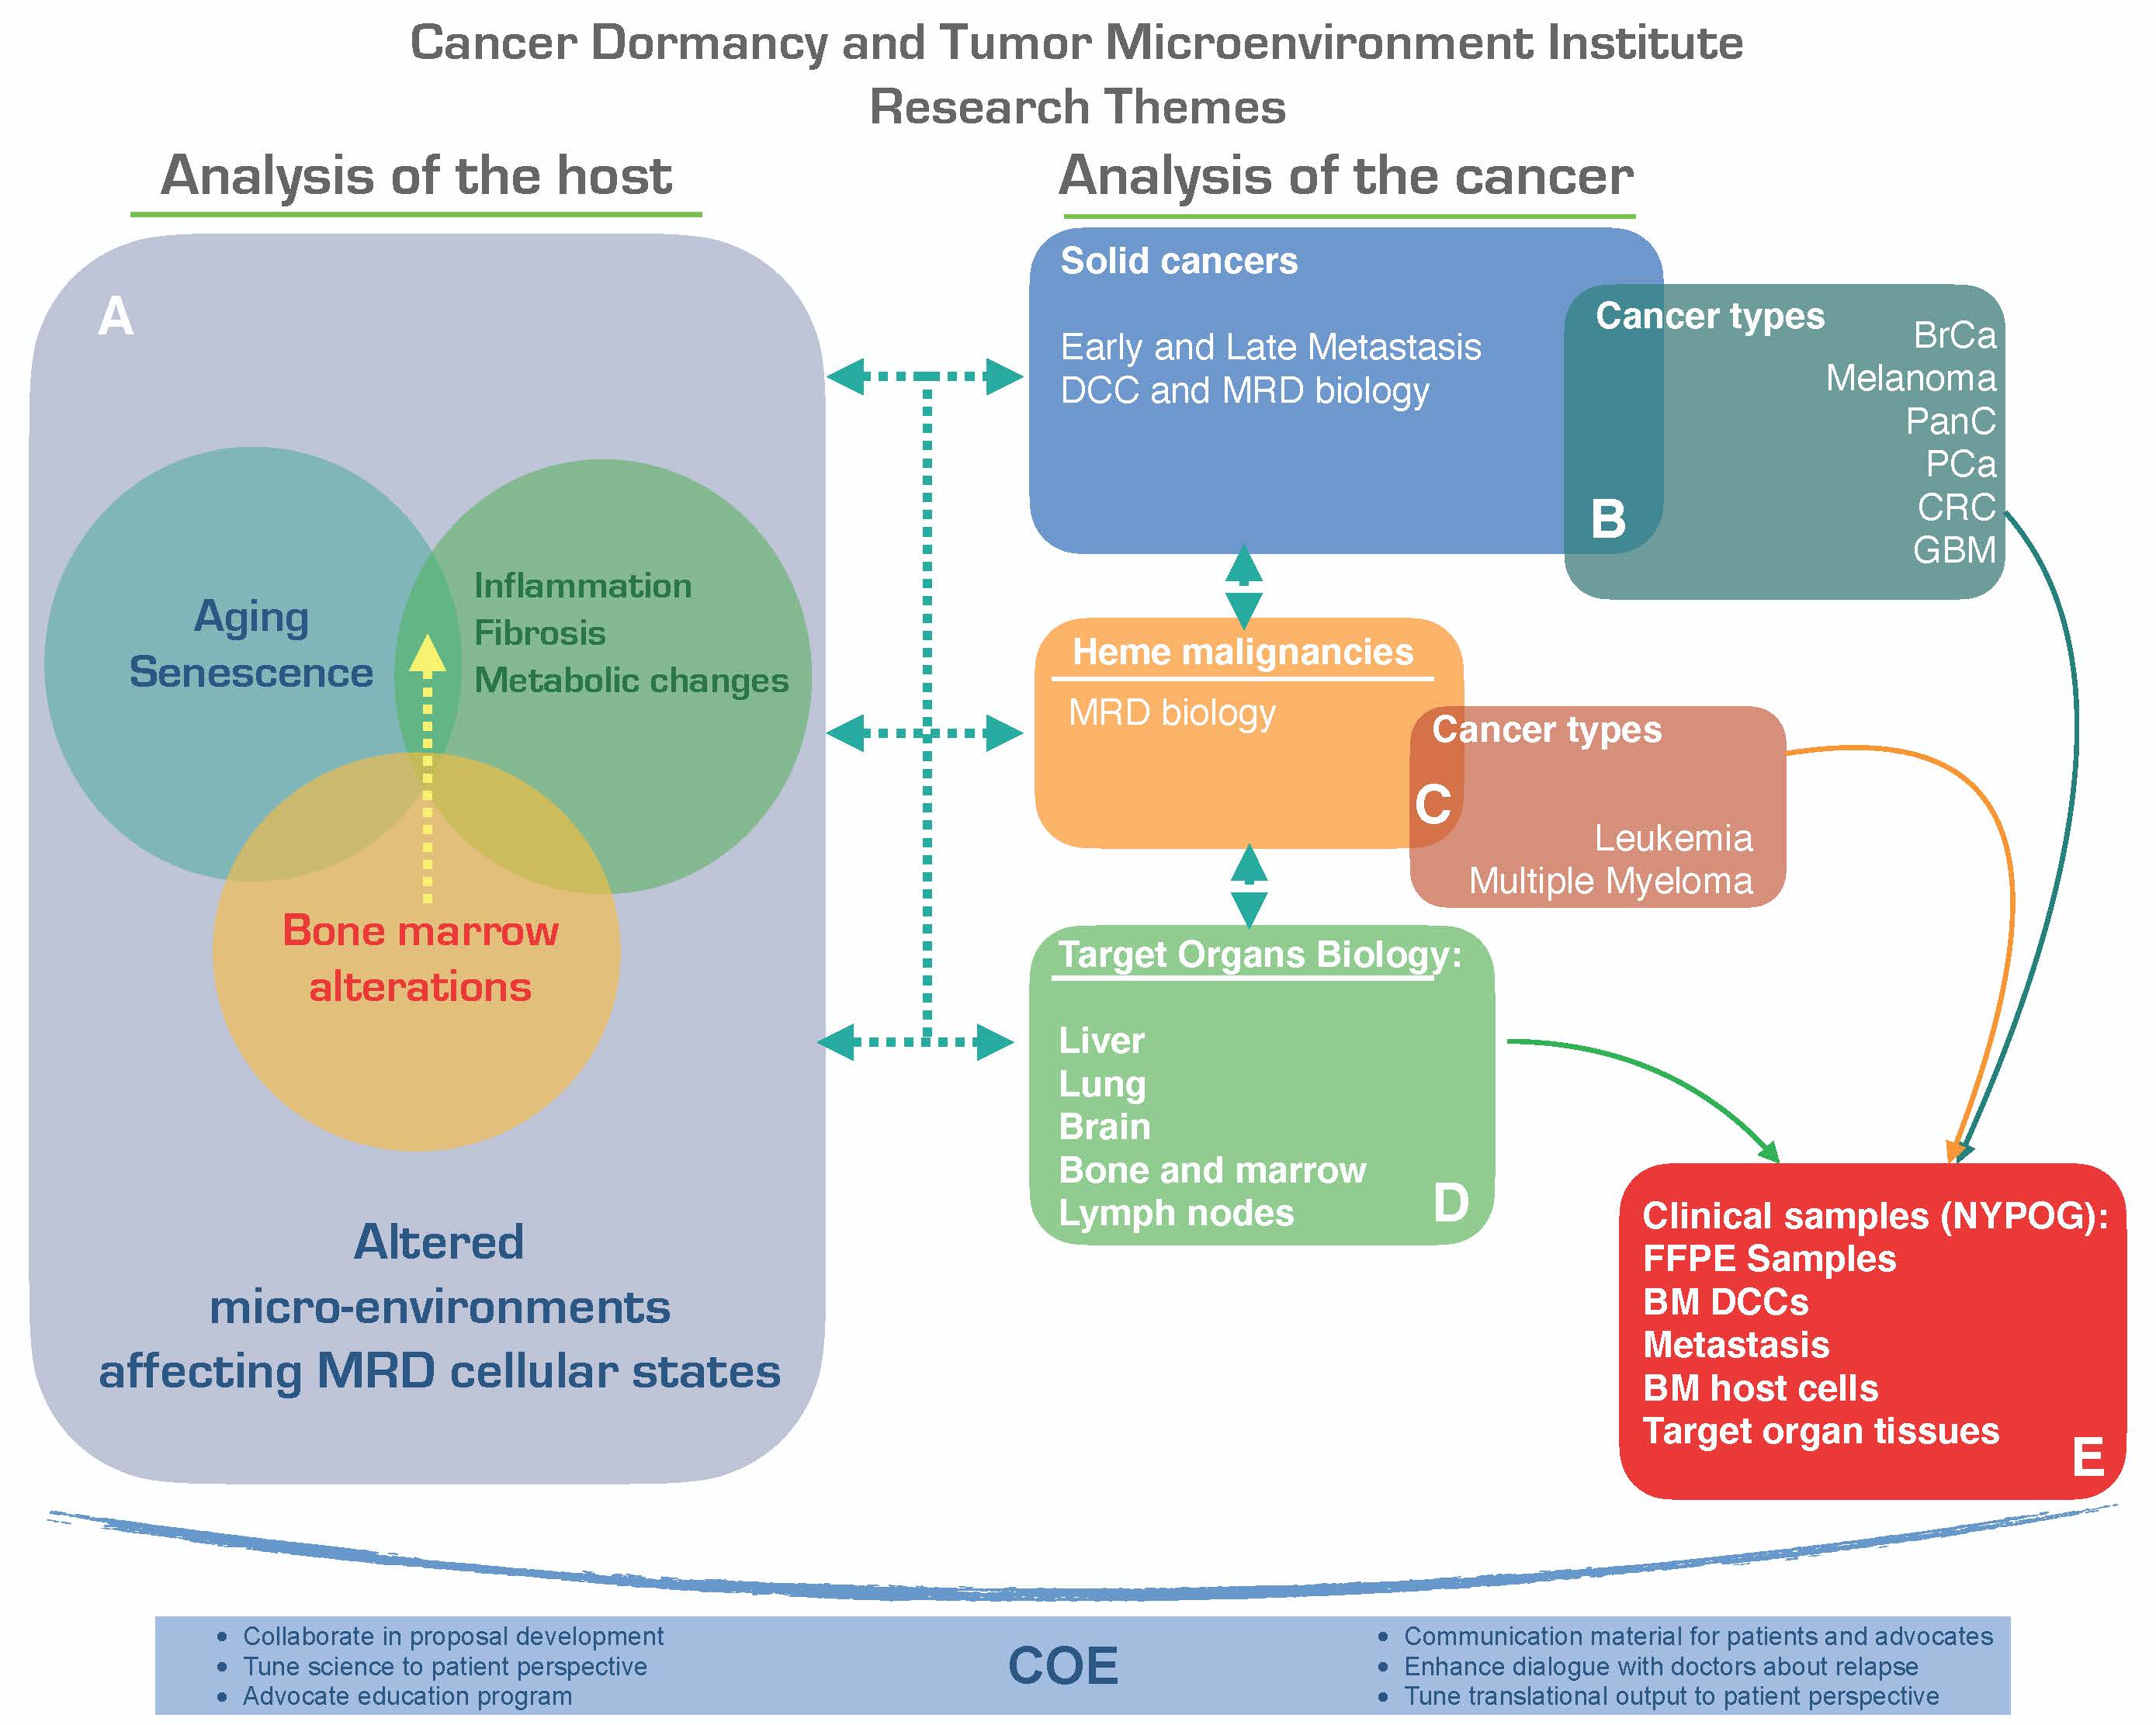 CDTMI Research Themes - a flowchart detailing the CDTMI's approach to analysis of cancer and the host to study cancer dormancy and relapse